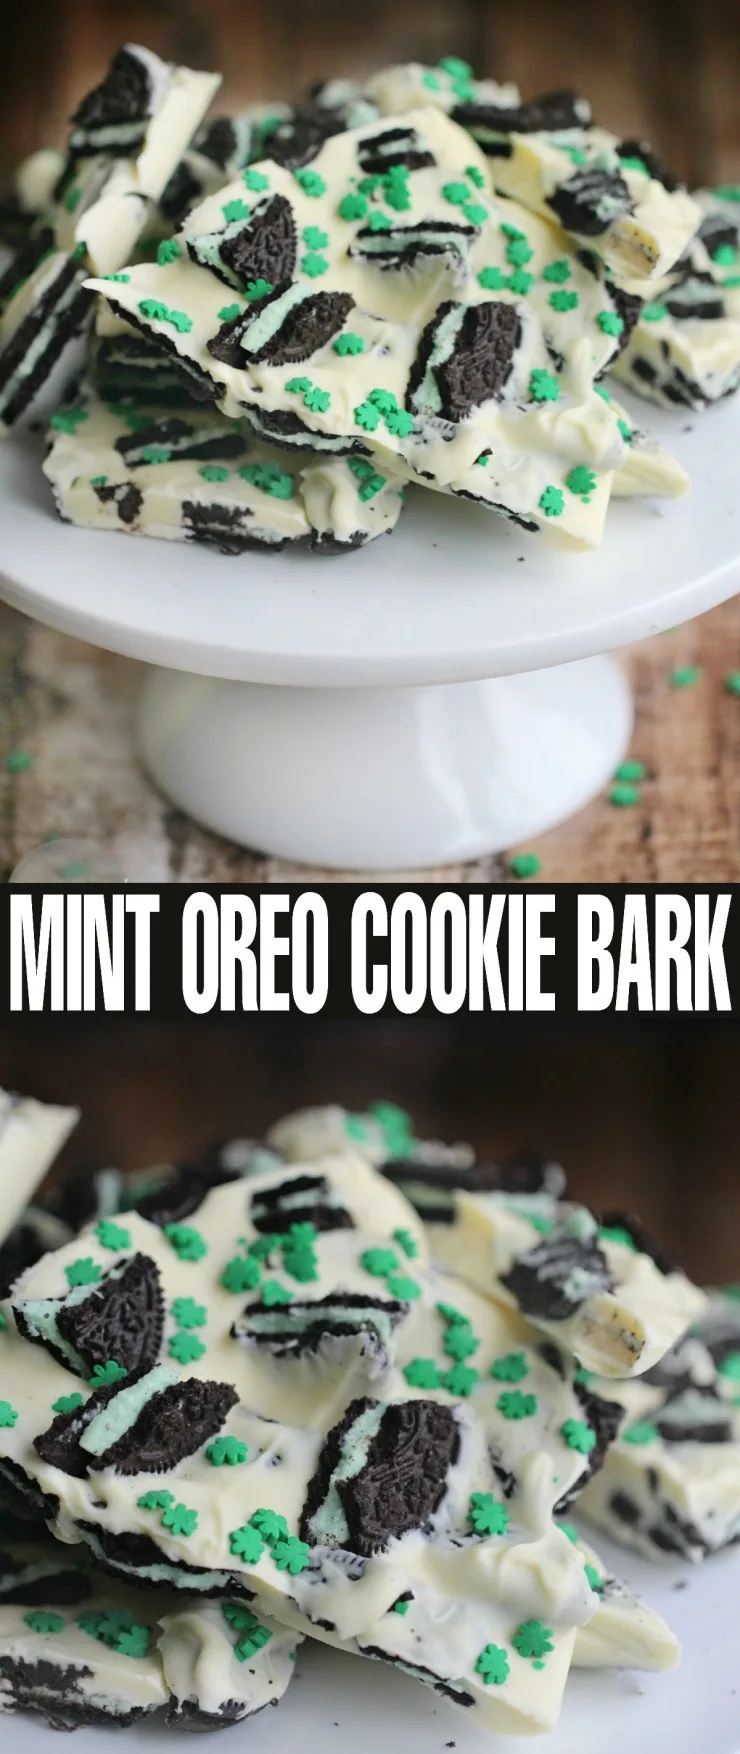 Looking for a fun and easy St. Patrick's Day inspired dessert?  Maybe something no-bake?  Check out this adorable Mint Oreo Cookie Bark made with crumbled cool mint Oreo's and white chocolate sprinkled over with cute little shamrocks. 